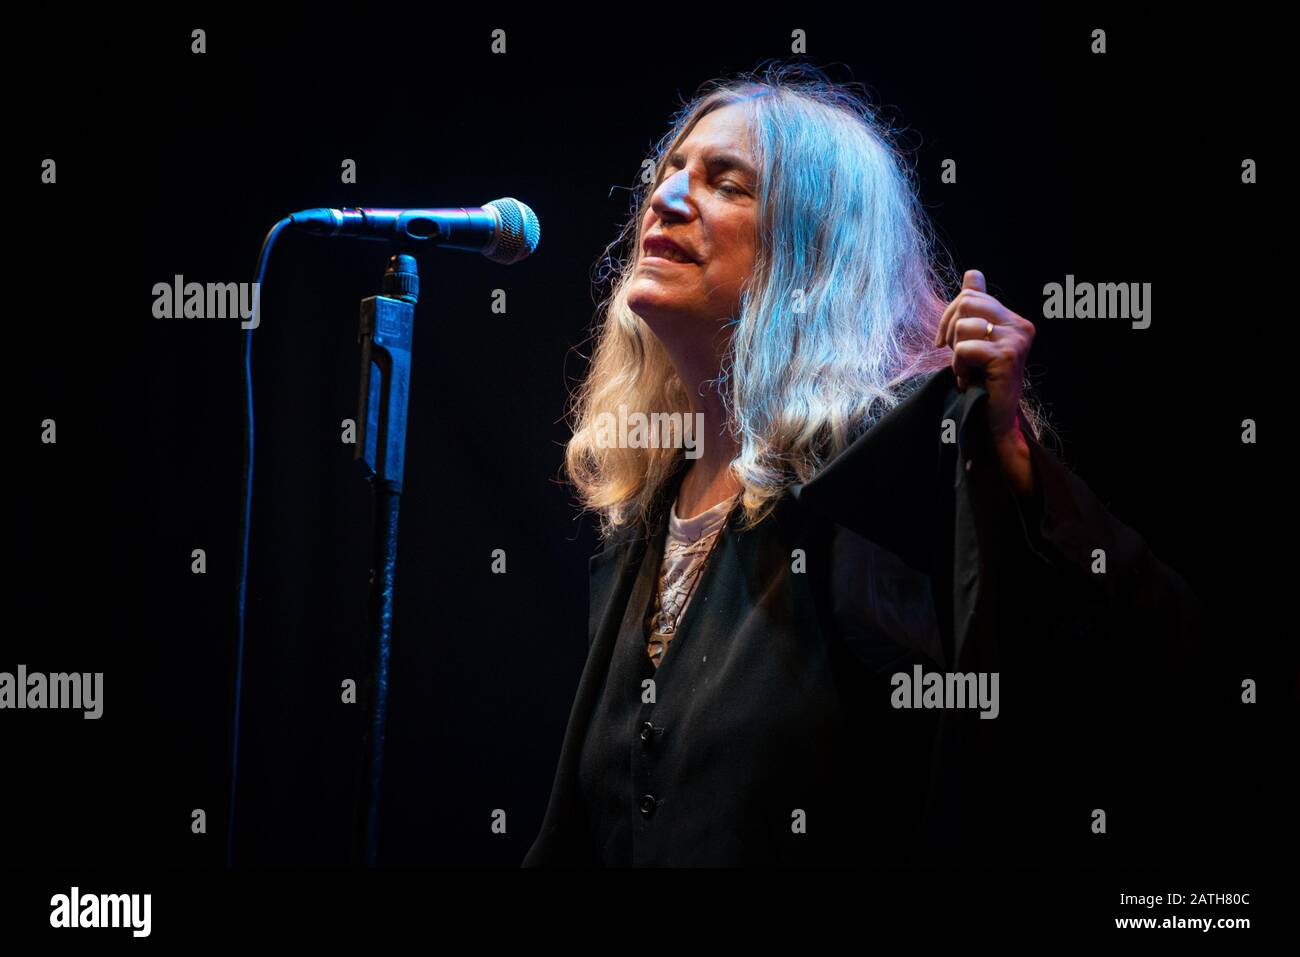 FLOWERS FESTIVAL, TORINO, ITALY - 2015/07/27: The American singer Patricia Lee Smith, better known as Patti Smith, performing live for her “Horses” tour, at the Flowers Festival in Collegno Stock Photo